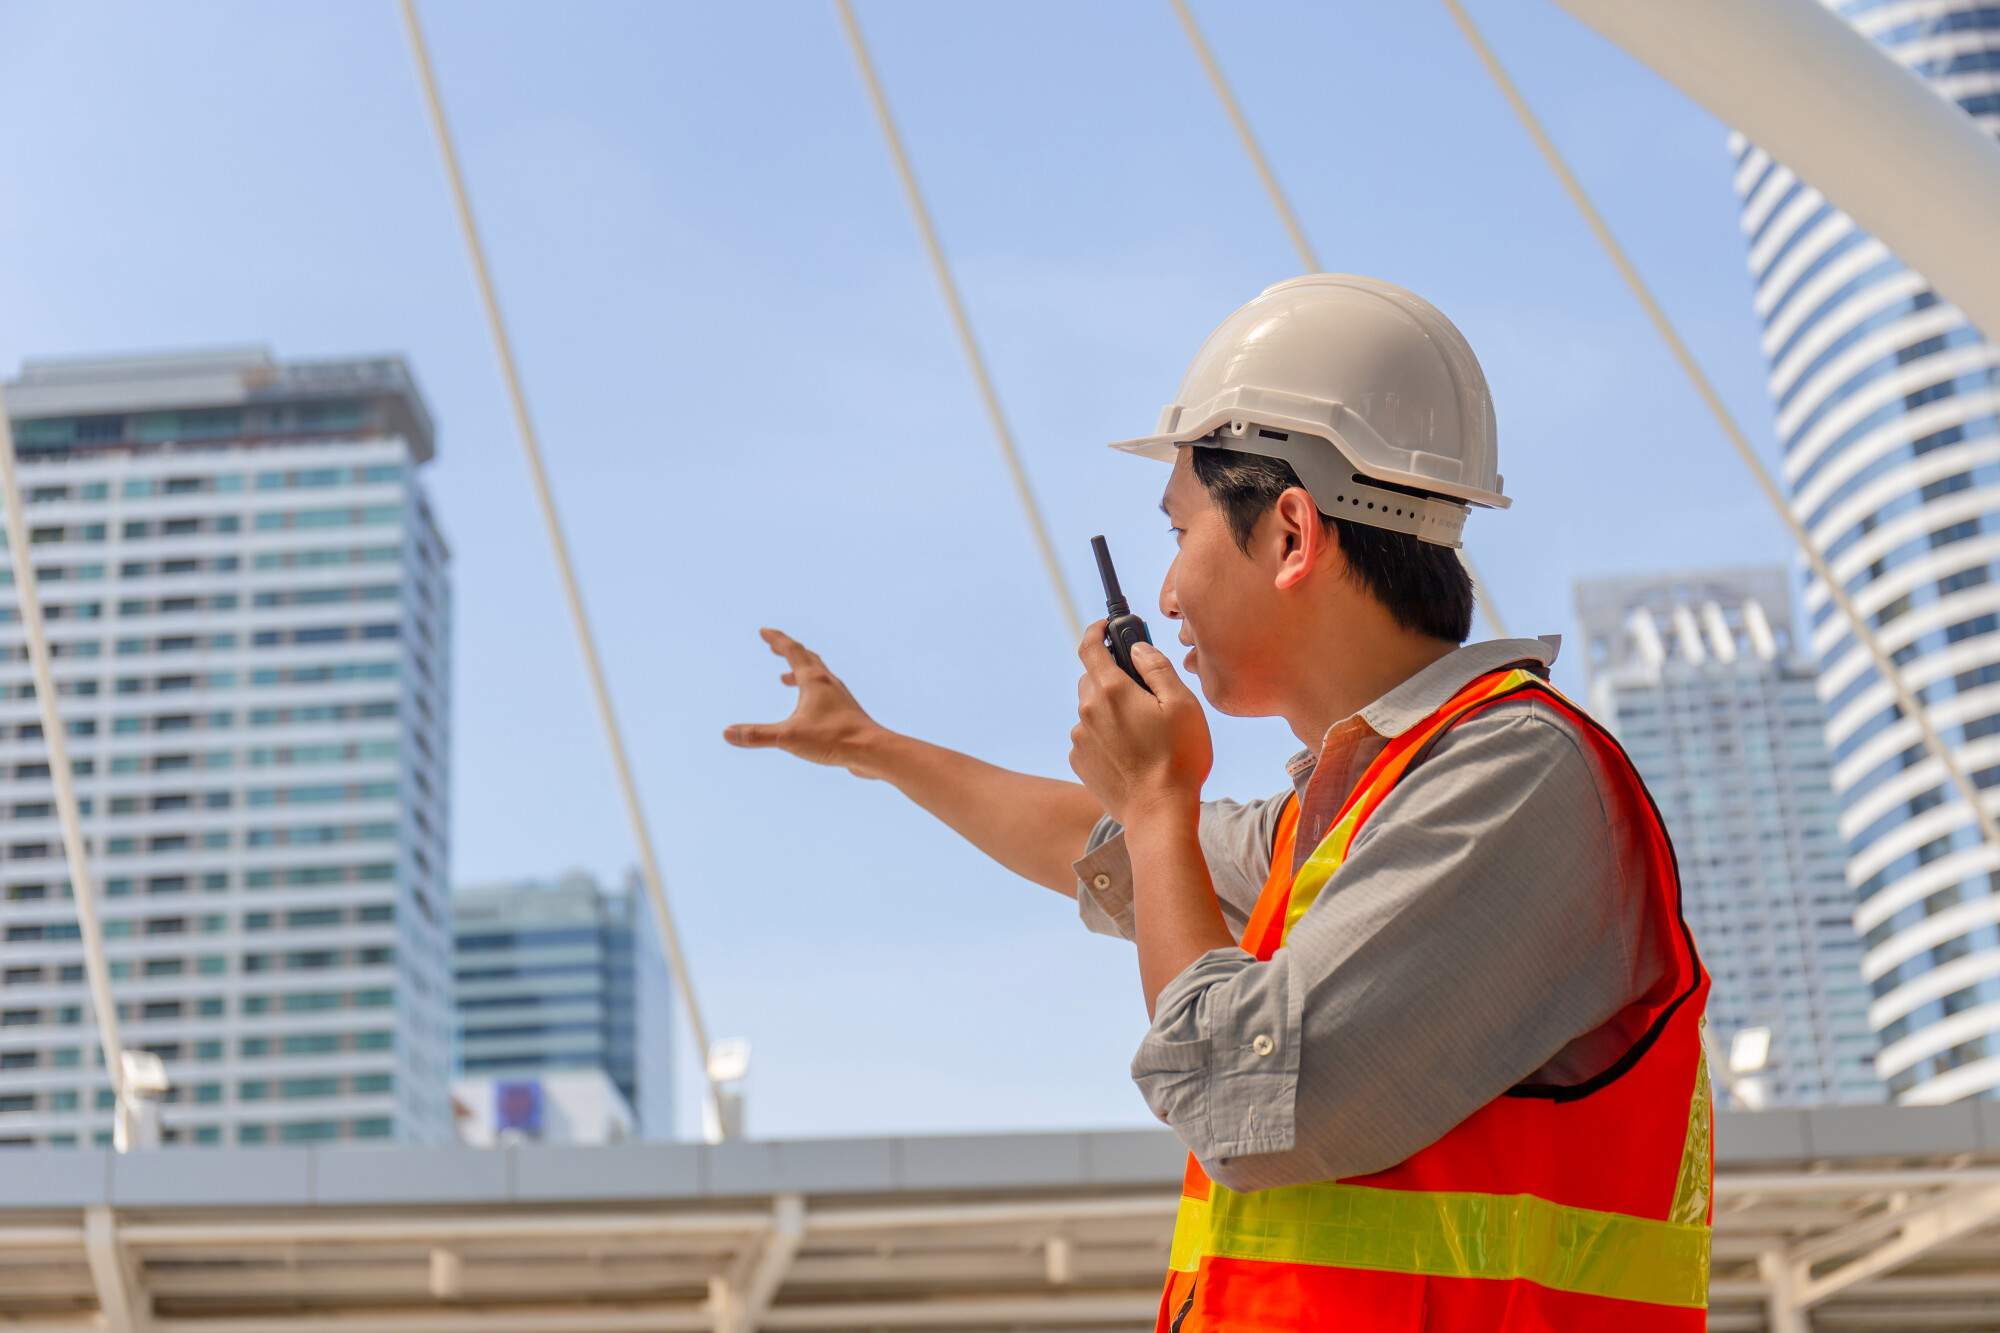 Buying a Two Way Radio: How to Choose the Best for Your Business